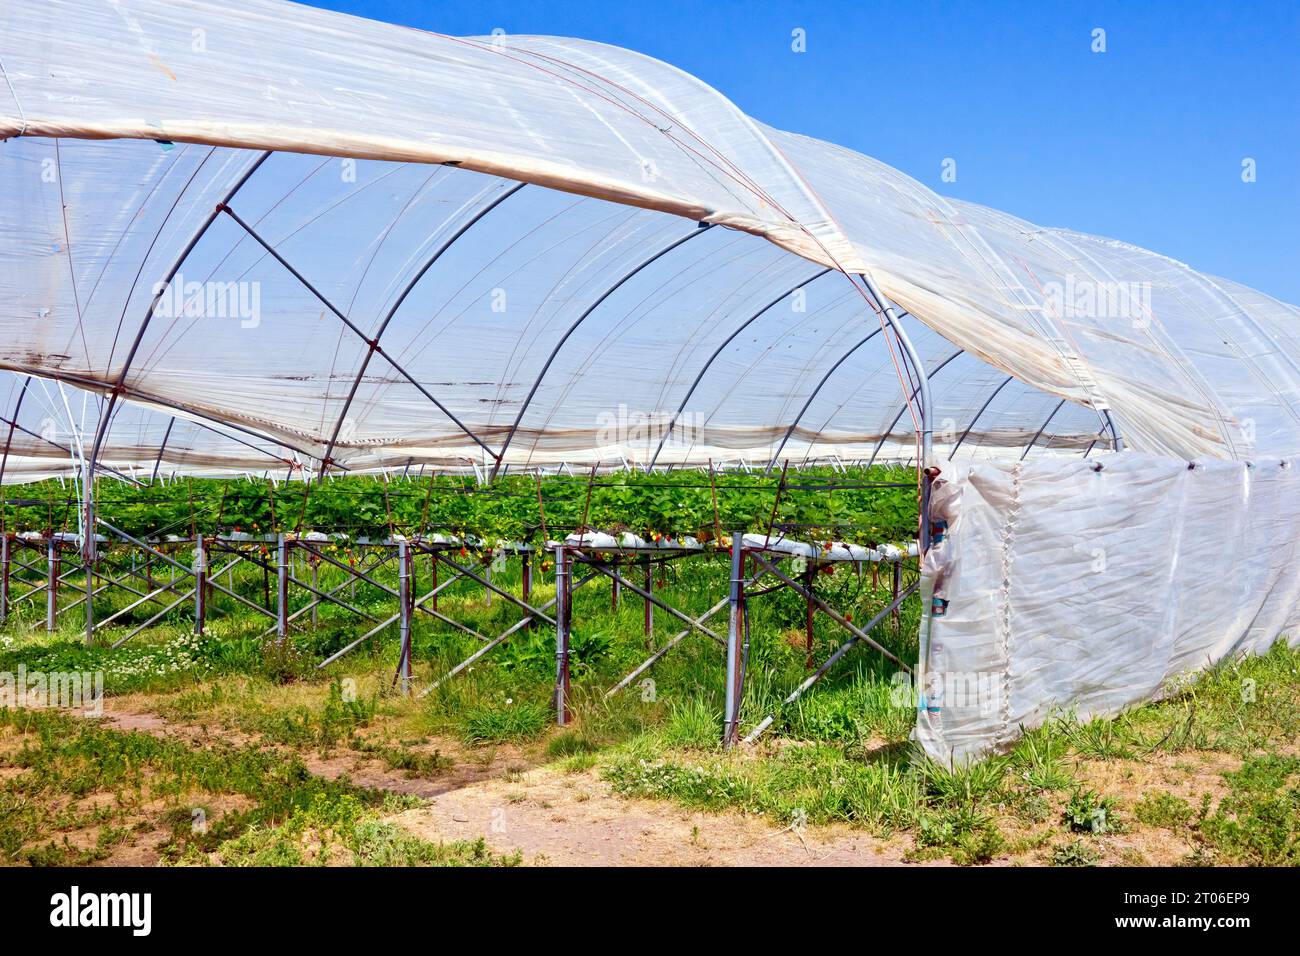 The entrance to a polytunnel on an intensive soft fruit farm on the east coast of Scotland, showing rows of benches dedicated to growing strawberries. Stock Photo